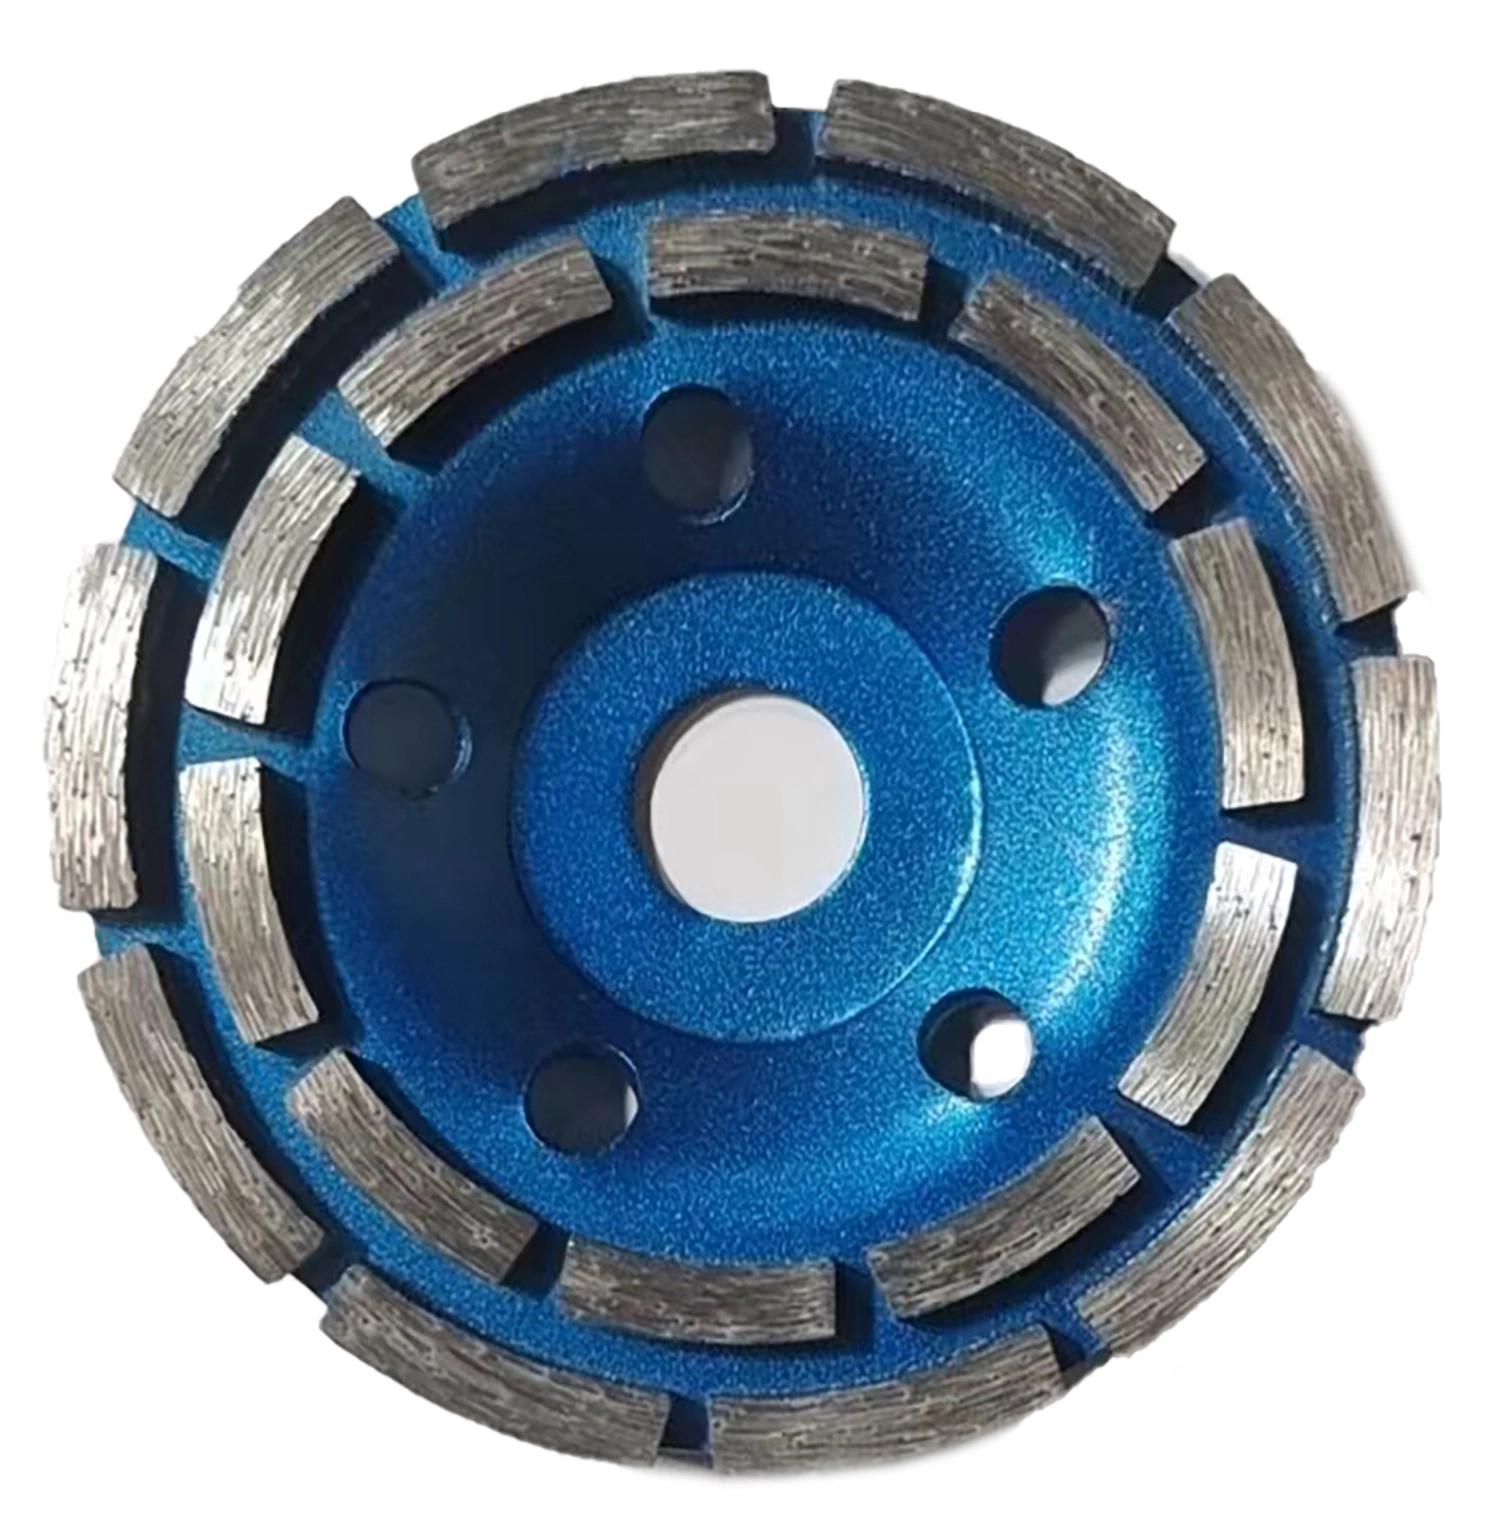 Continuous Turbo Diamond Granite Cup Cutting Grinding Wheel Disc Diamond Tools for Stone Marble Concrete